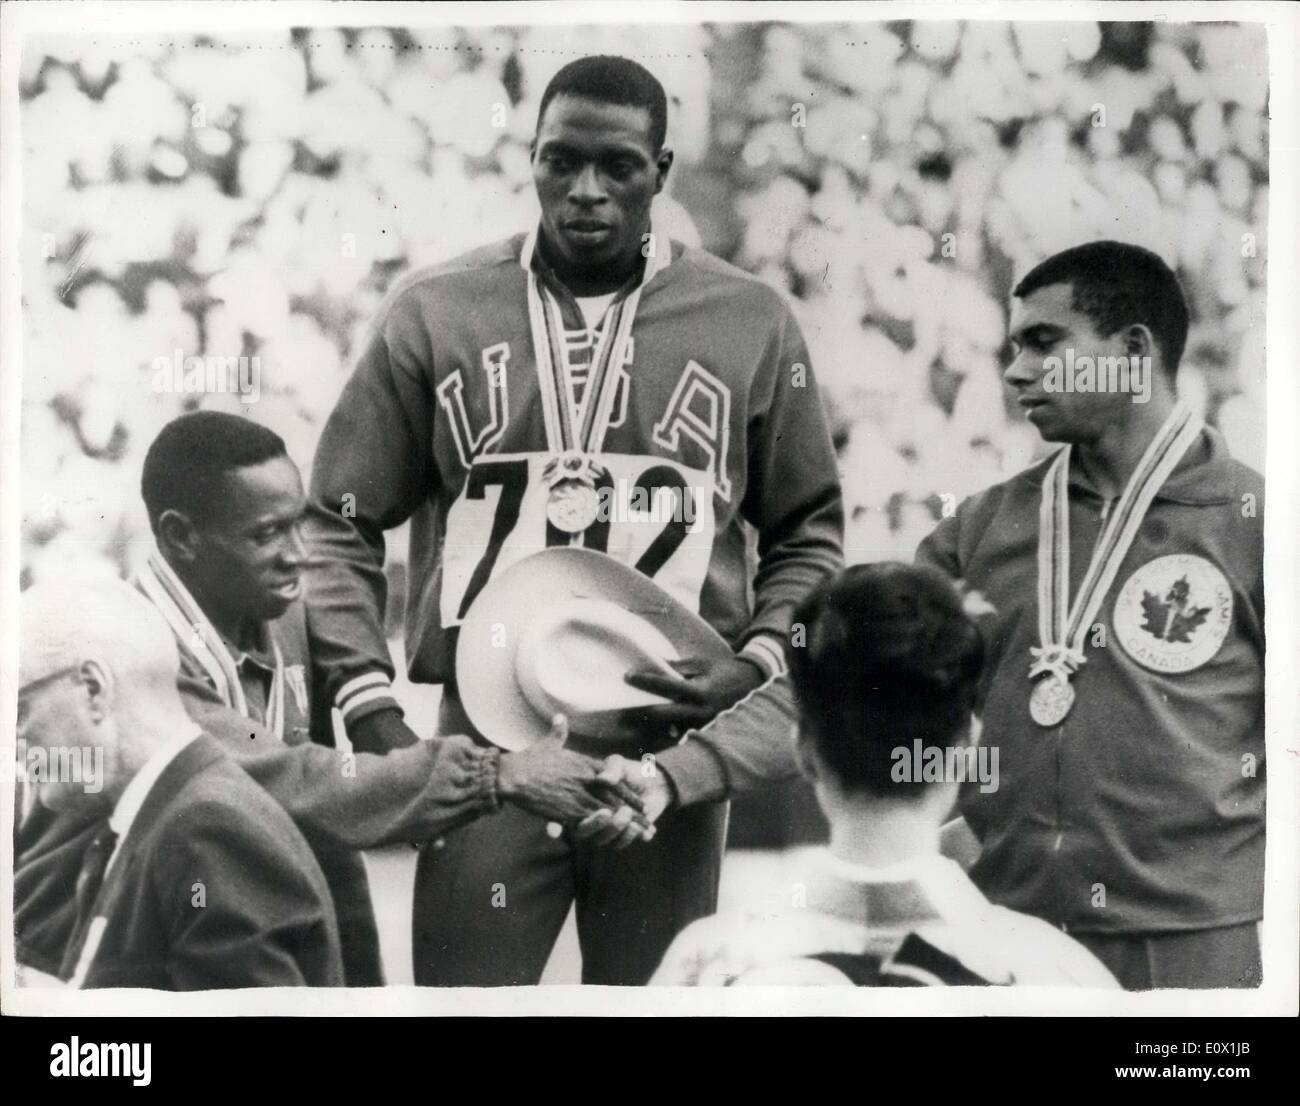 oct-16-1964-olympic-games-in-tokyo-hayes-wins-gold-medal-for-usa-robert-E0X1JB.jpg